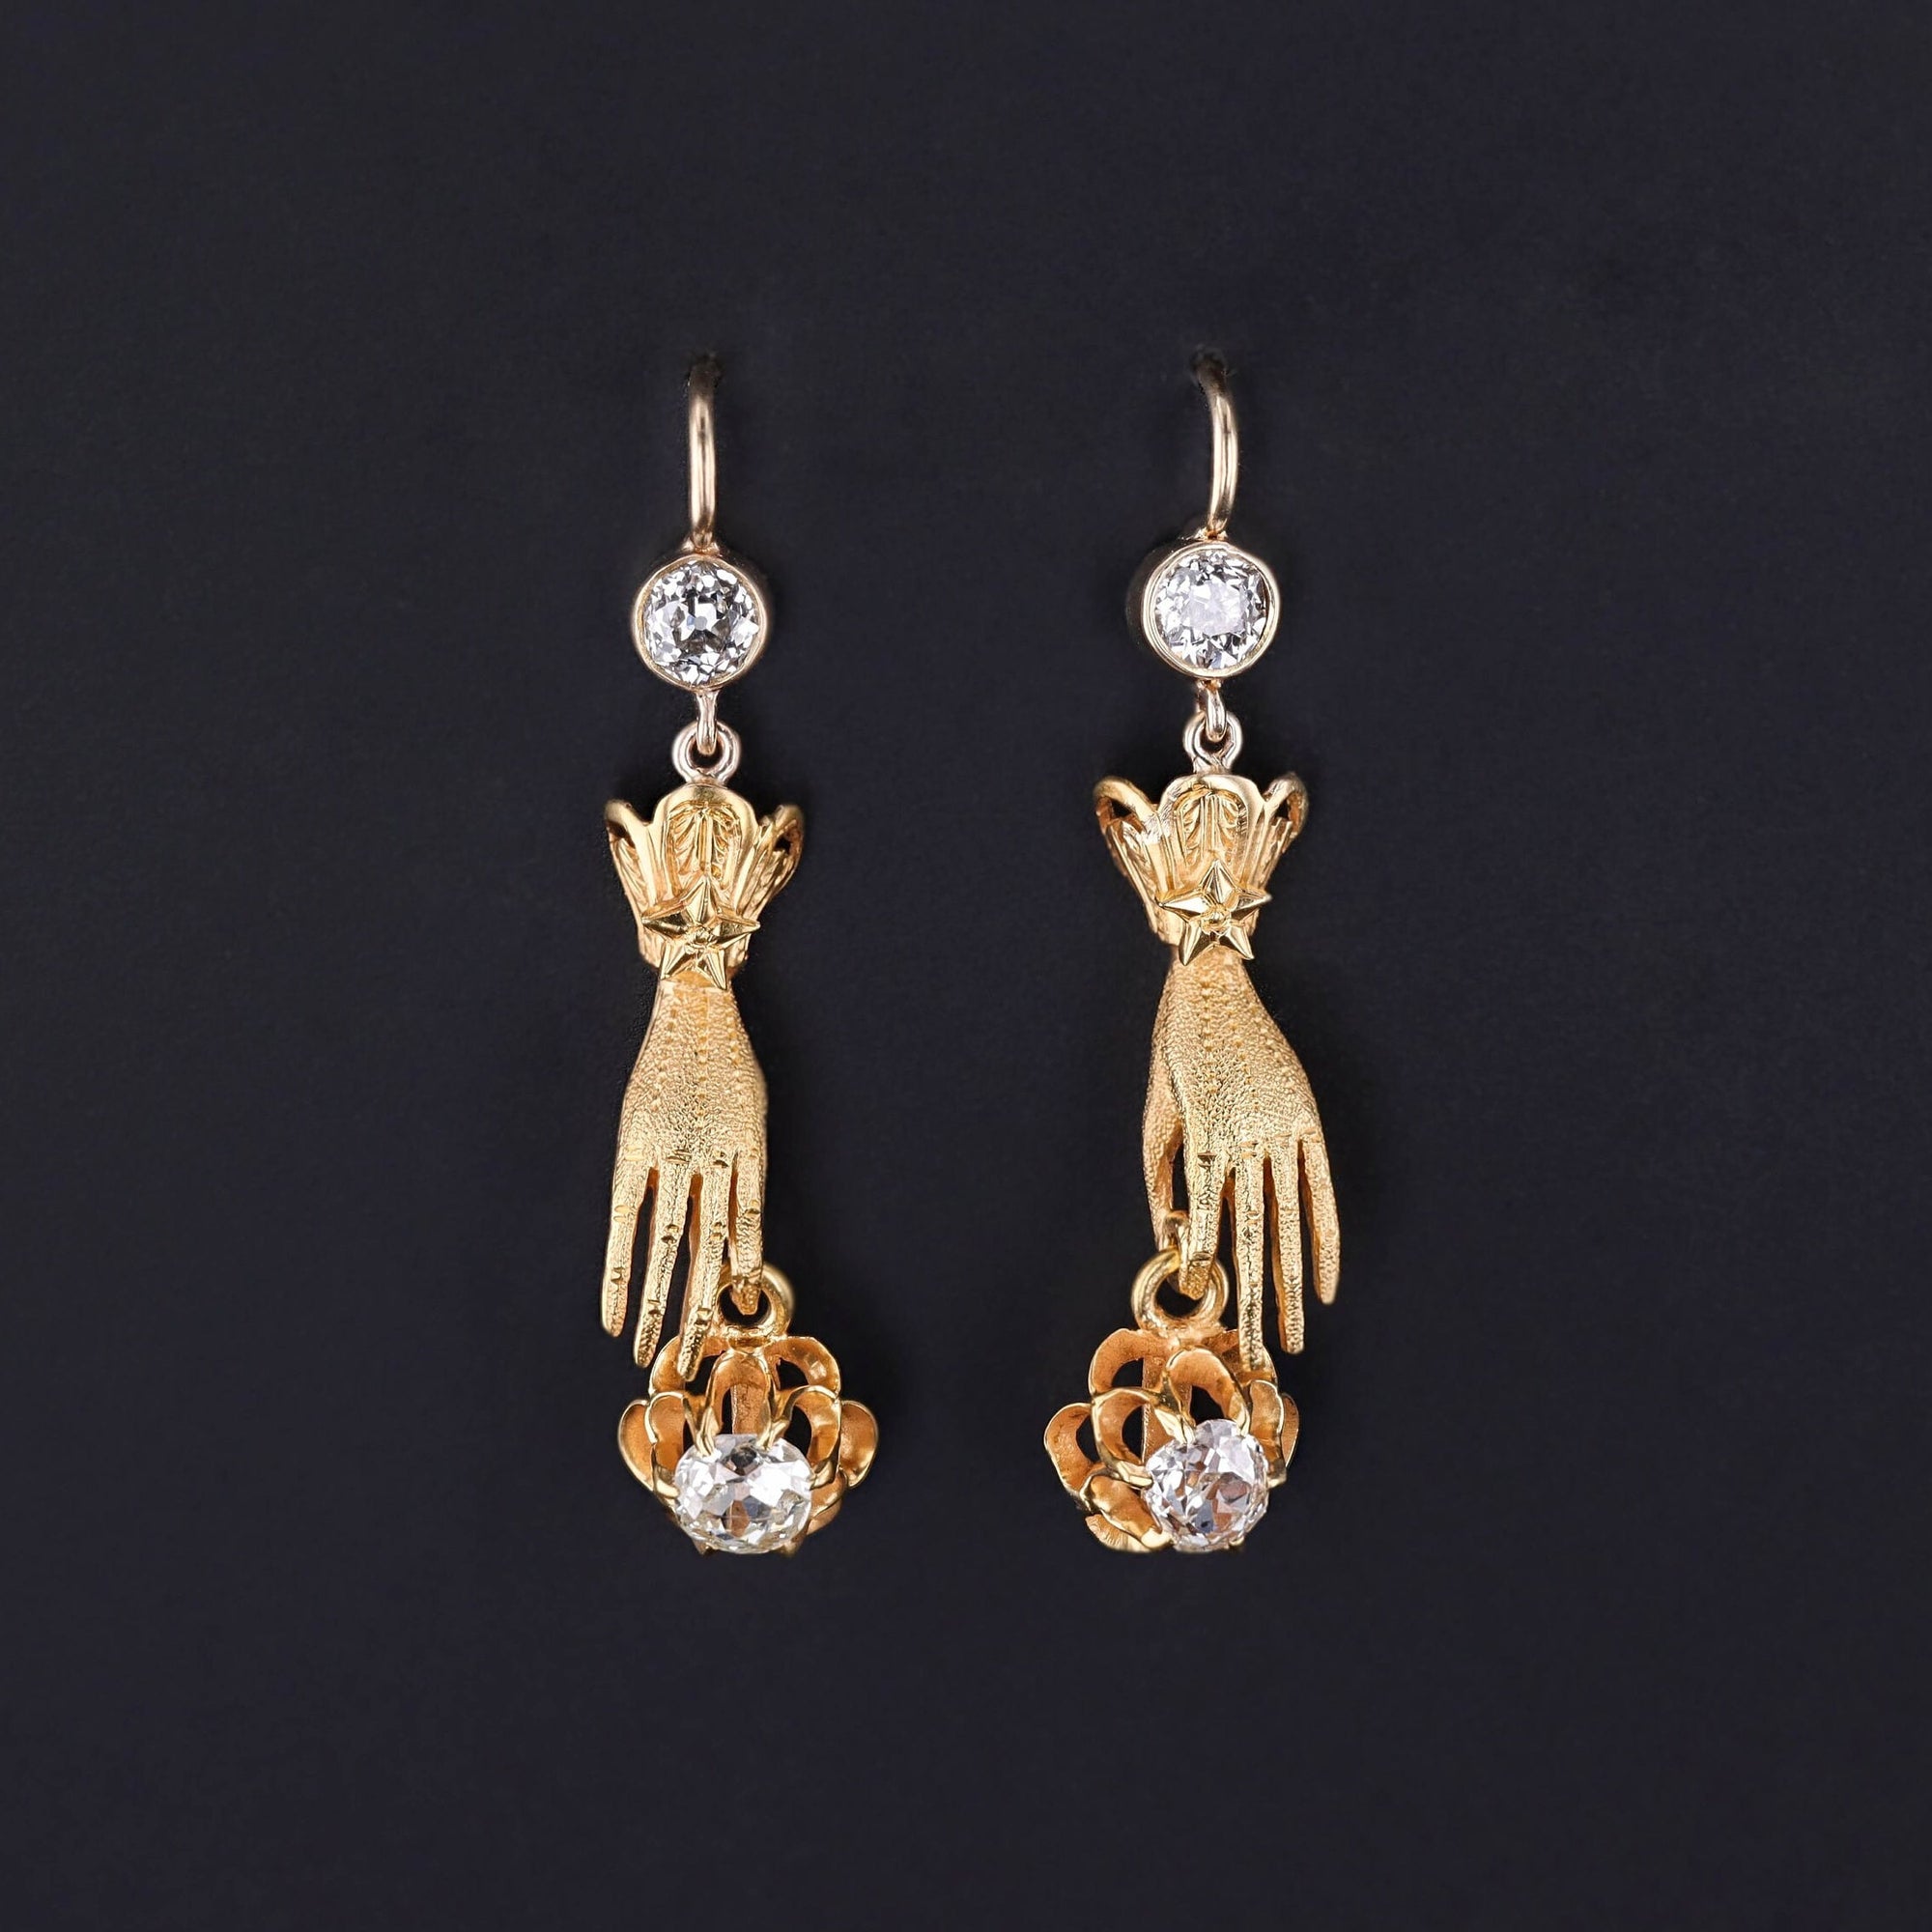 Antique Diamond Hand Earrings of 14k and 18k Gold